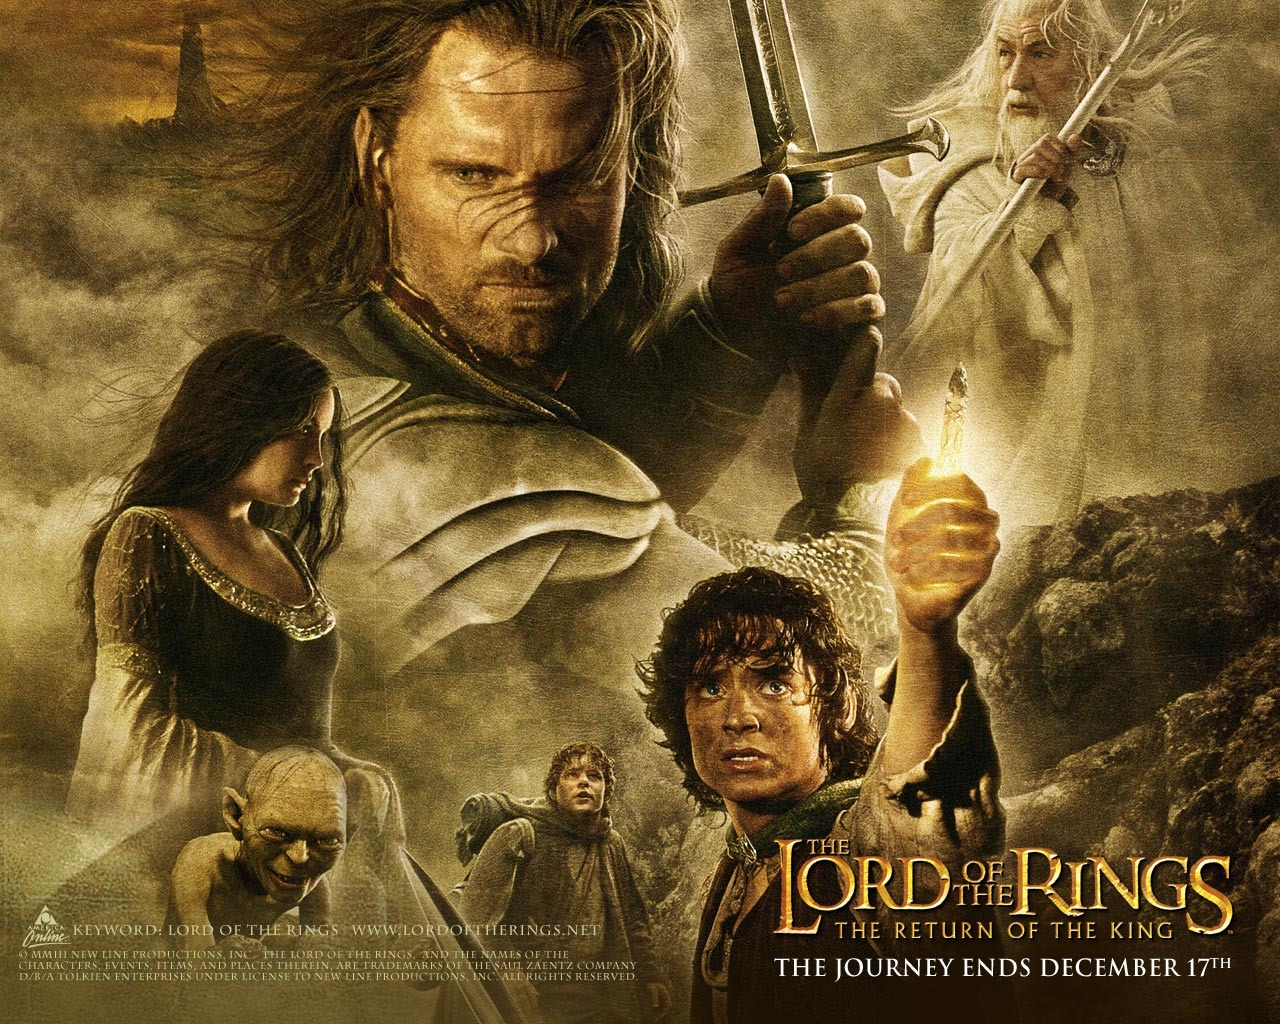 The Lord of the Rings wallpaper #20 - 1280x1024